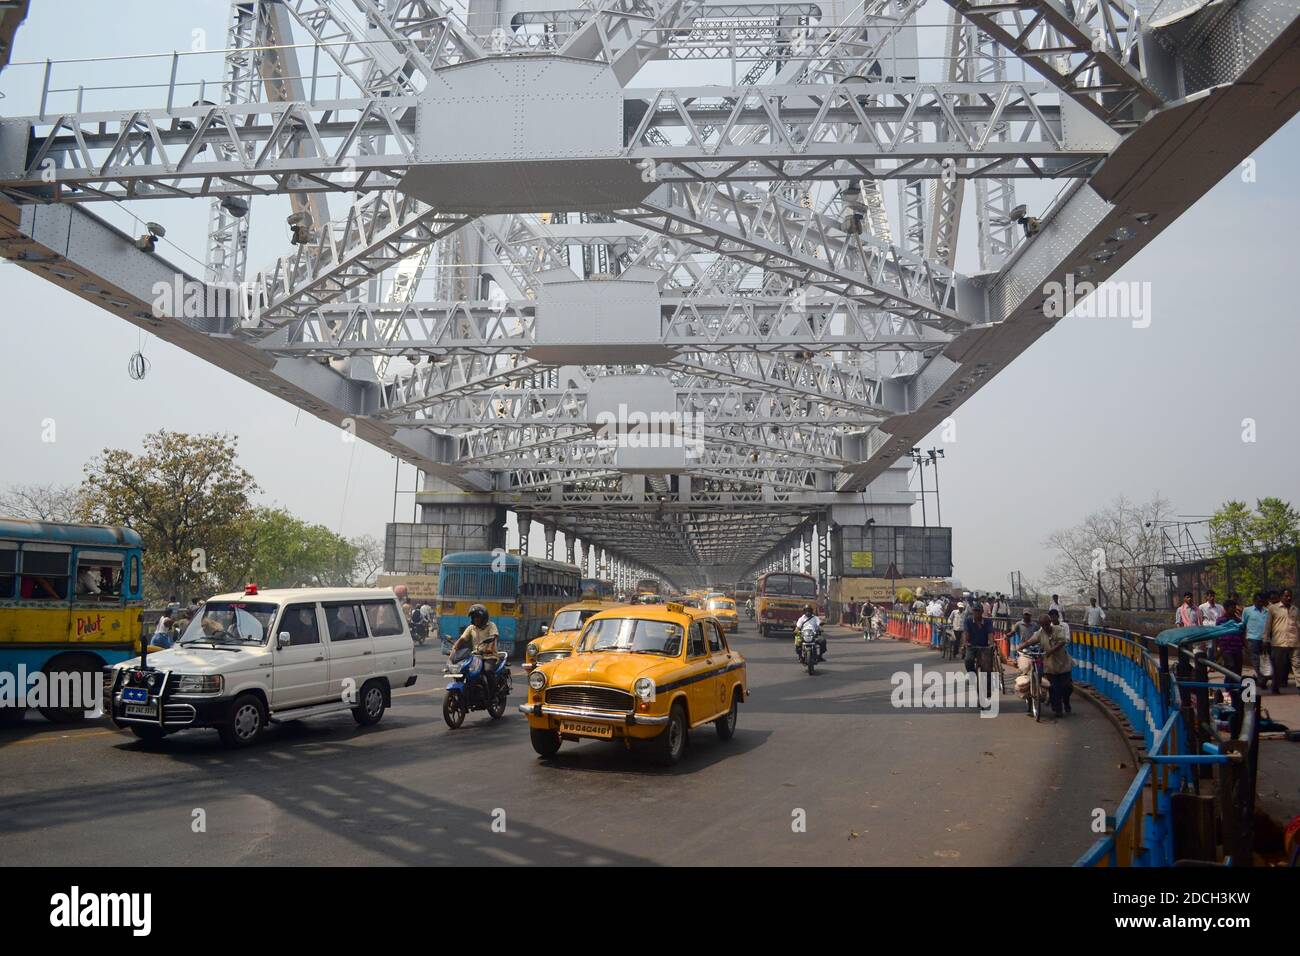 Kolkata, India - March, 2014: Cars, motorbikes and other transport vehicles on the Howrah bridge Stock Photo